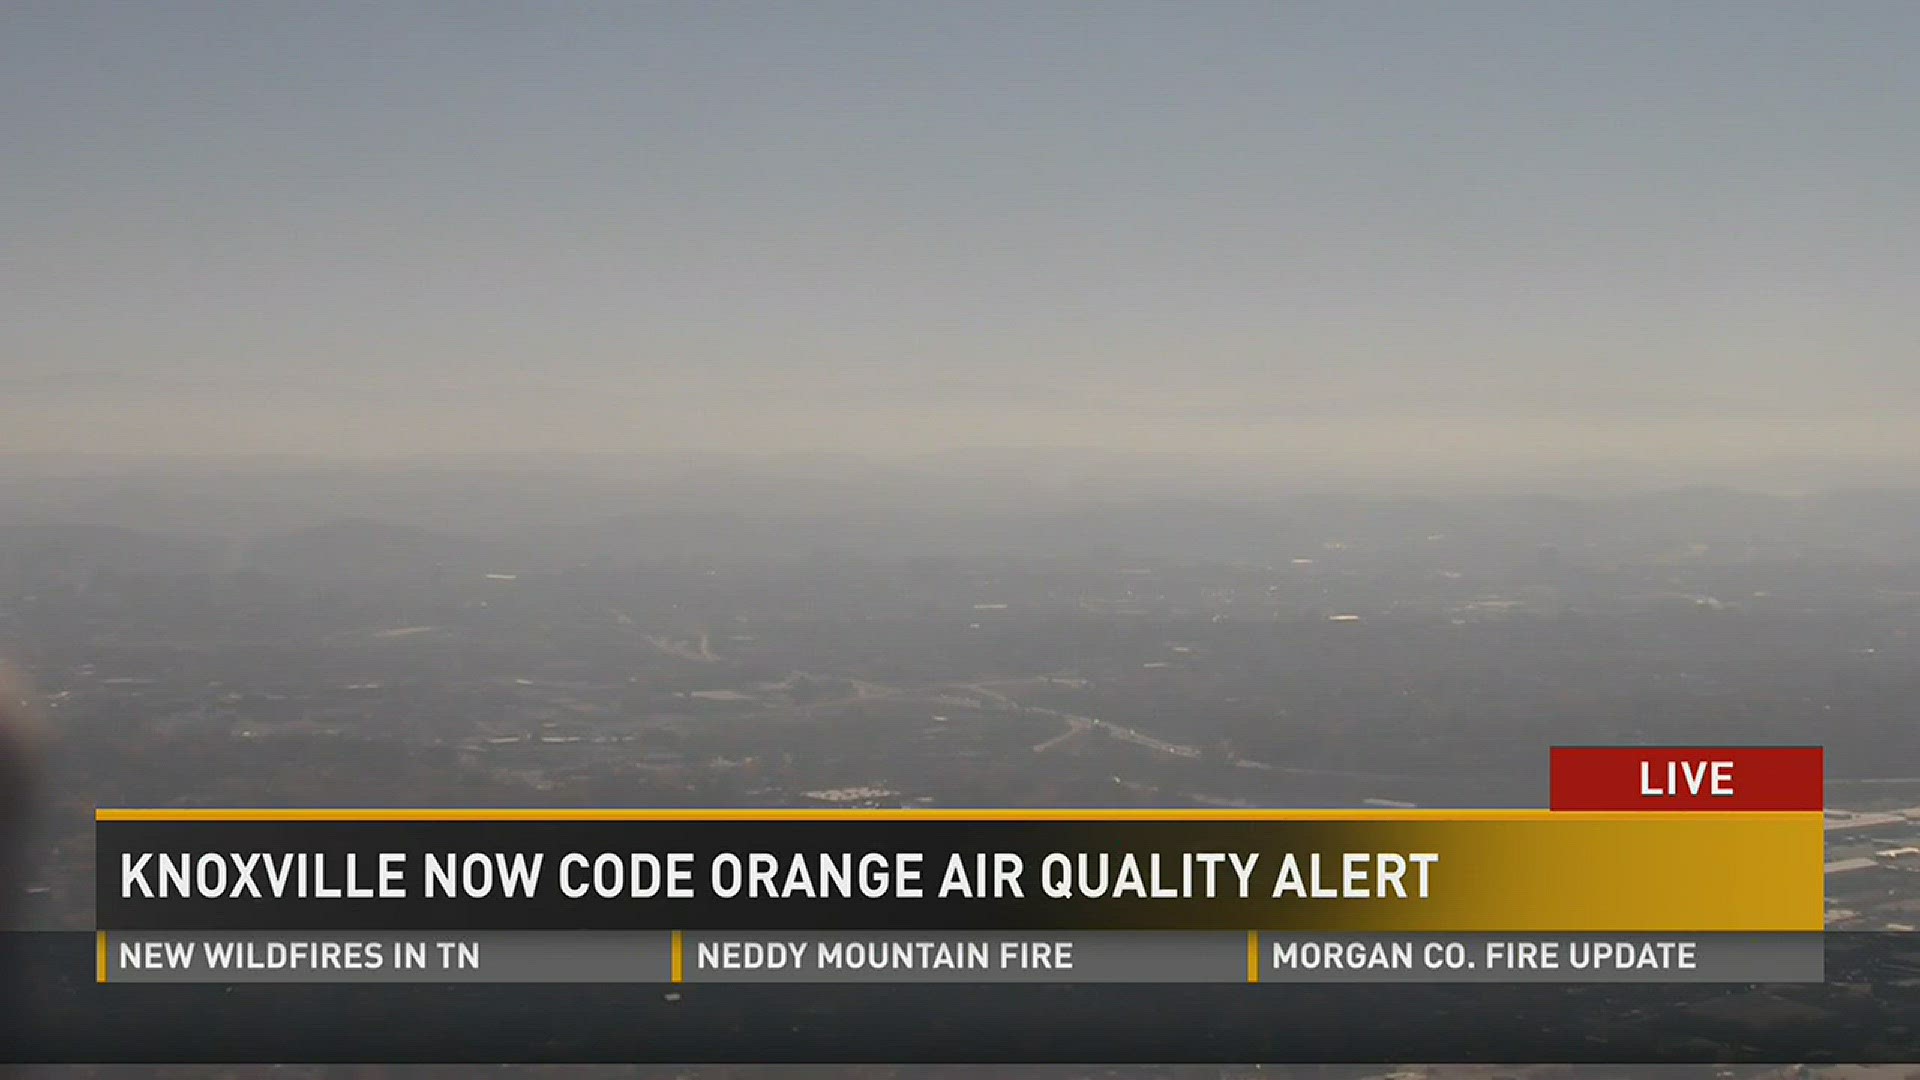 A Code Orange Air Quality Alert has been issued for Thursday covering the Knoxville-area and Great Smoky Mountains National Park.